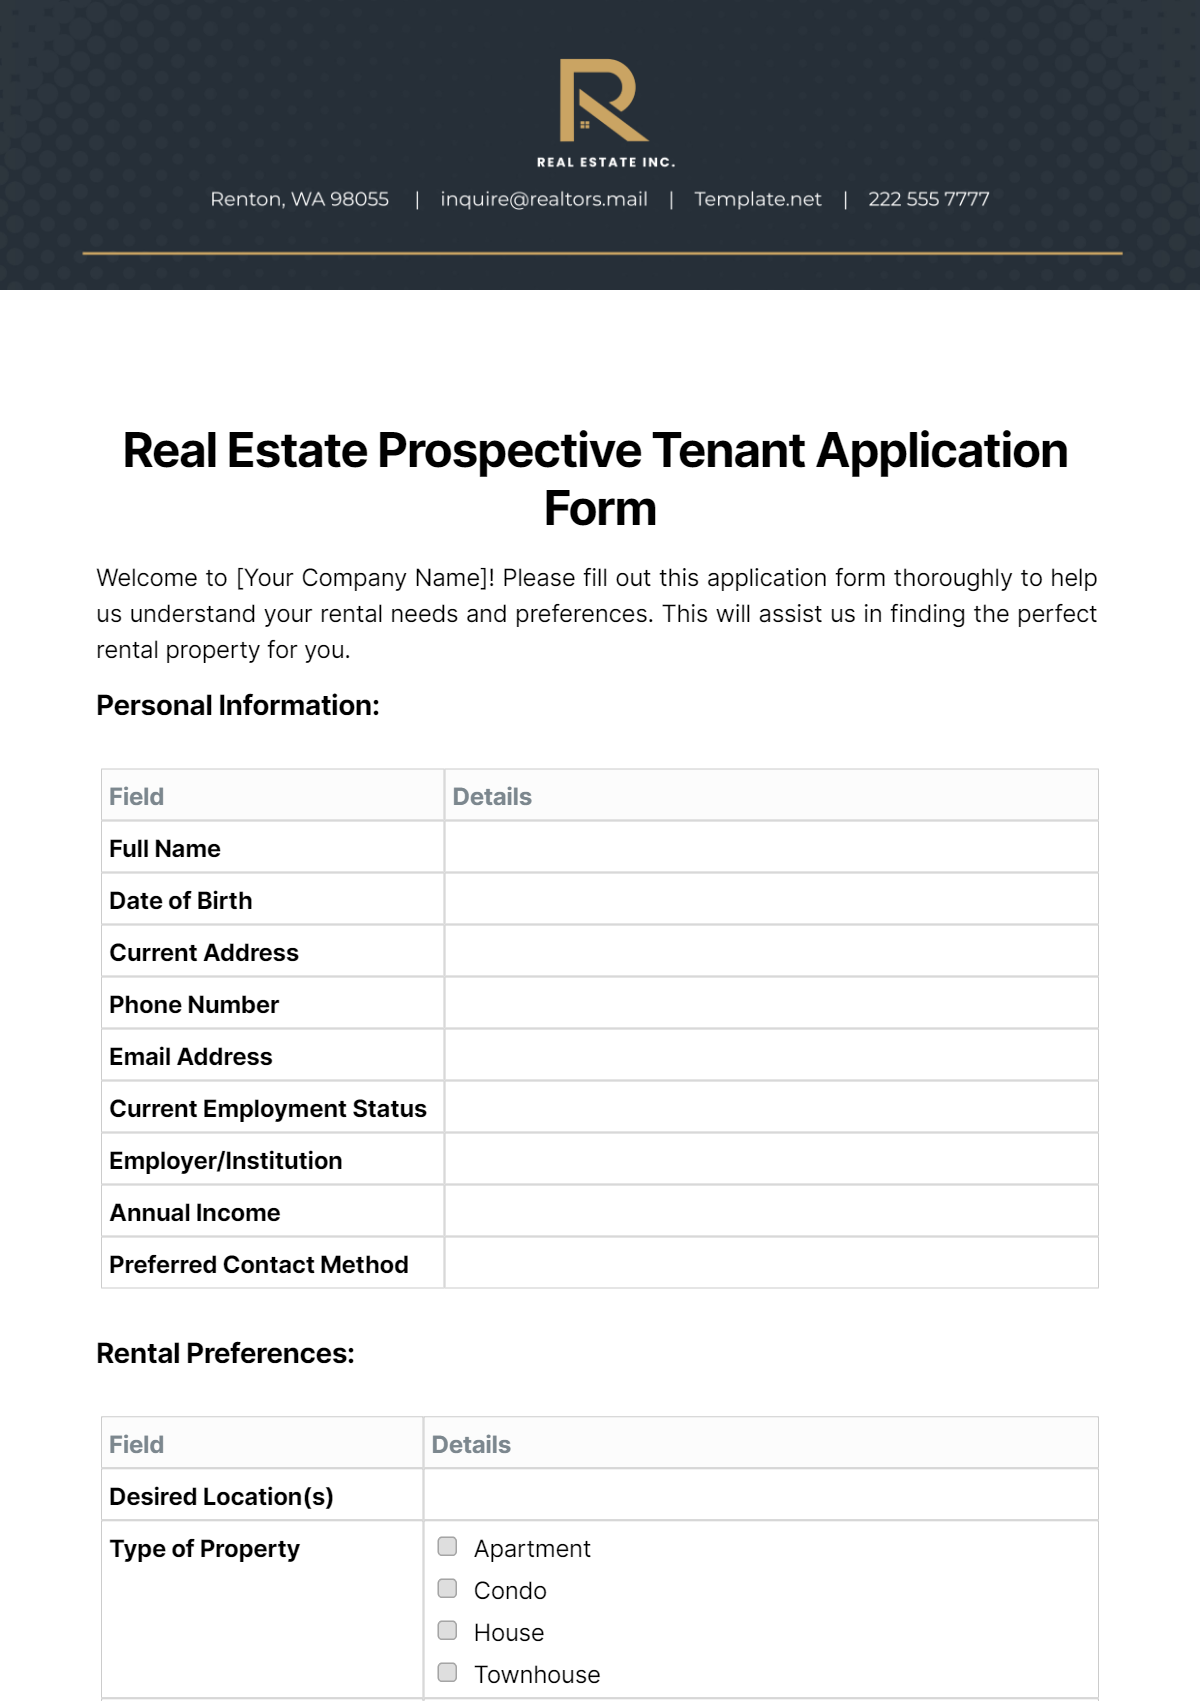 Real Estate Prospective Tenant Application Form Template